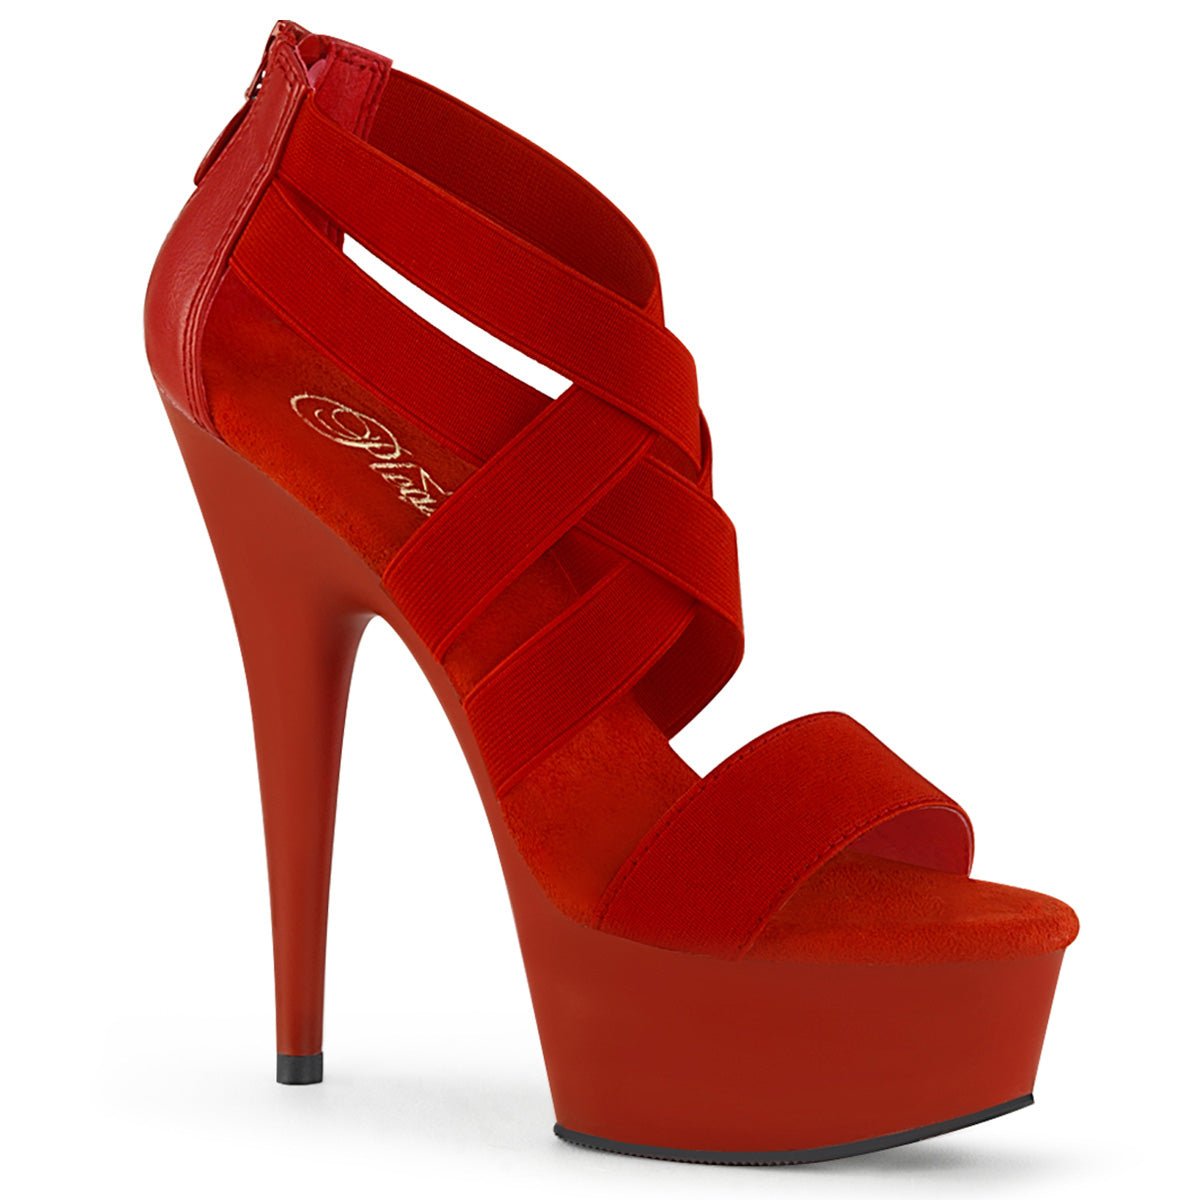 Pleaser Delight 669 Red - Model Express VancouverShoes